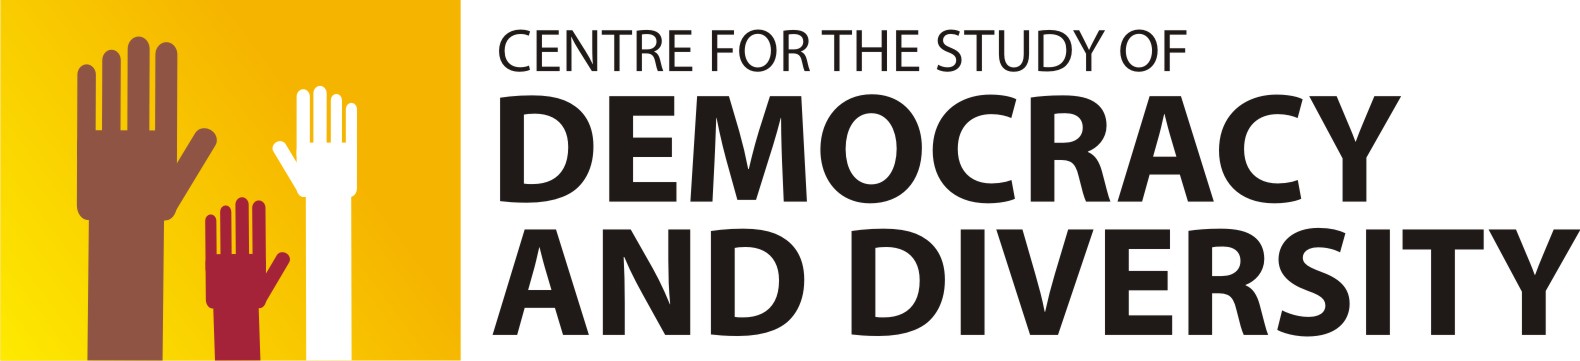 [Centre for the Study of Democracy and Diversity - logo]